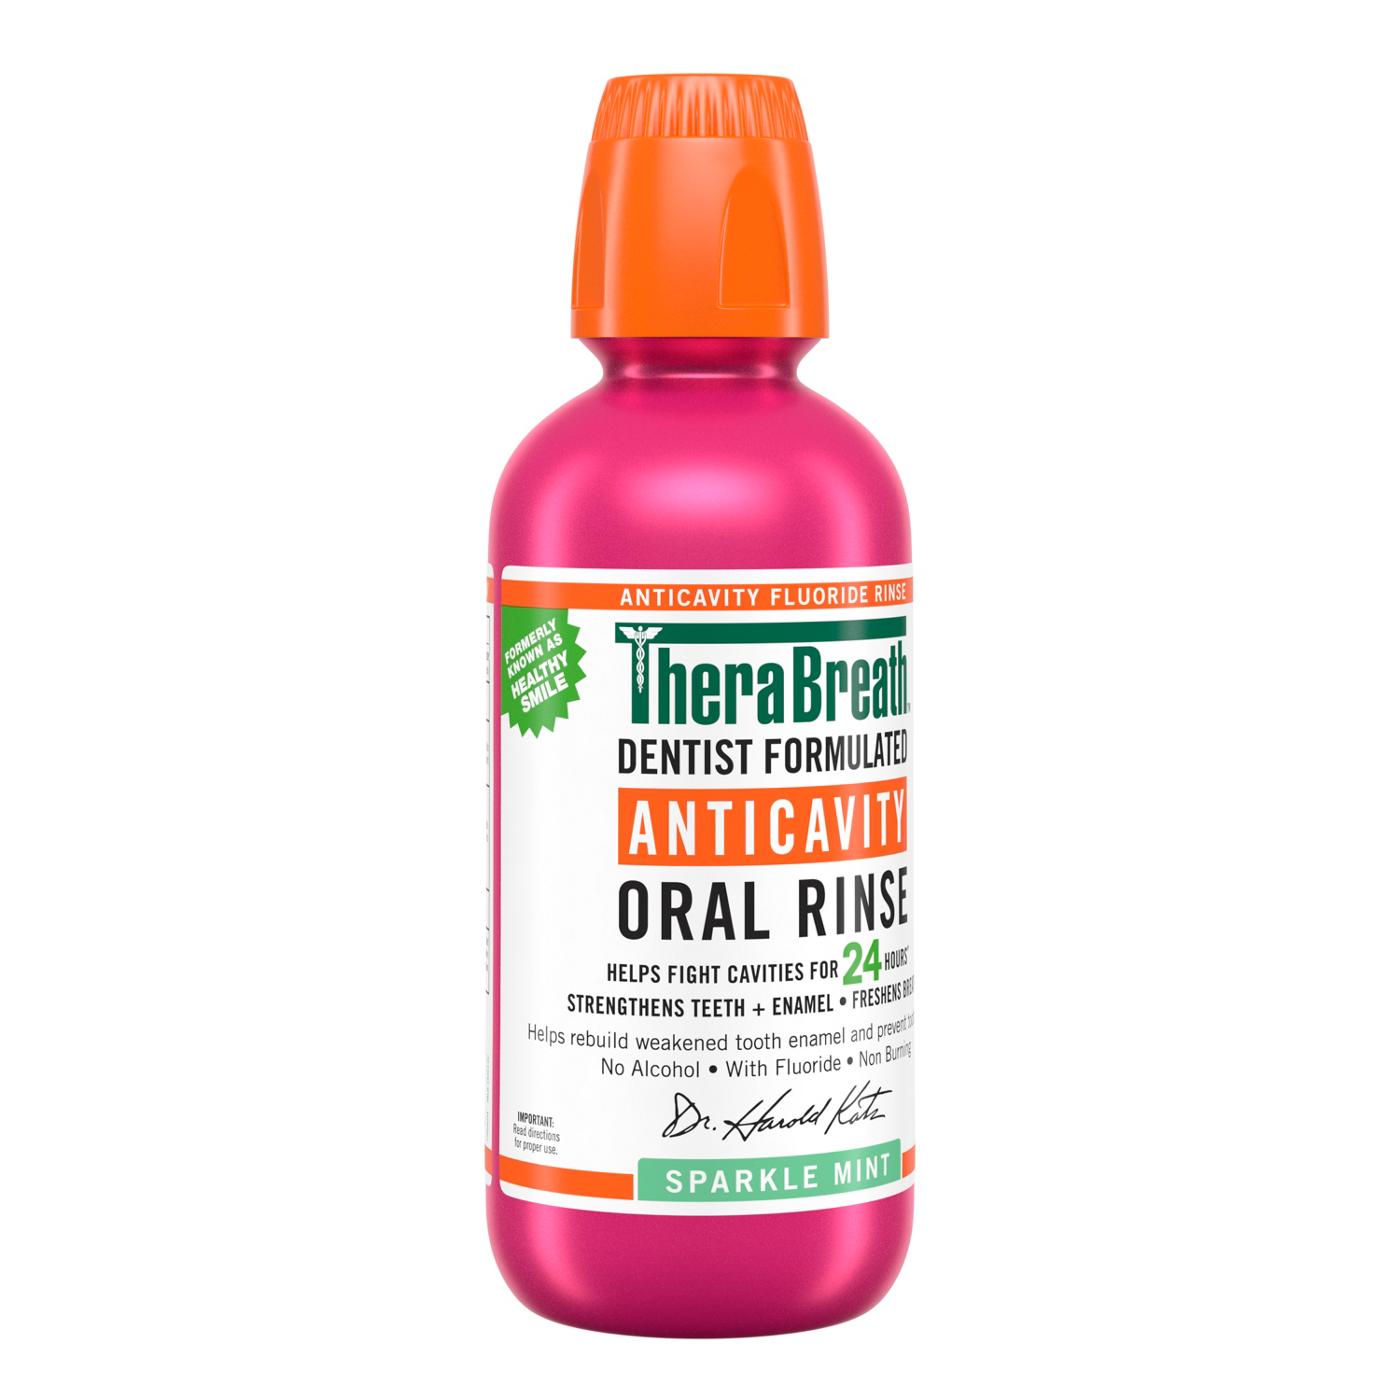 TheraBreath Anticavity Fluoride Mouthwash - Sparkle Mint; image 5 of 5